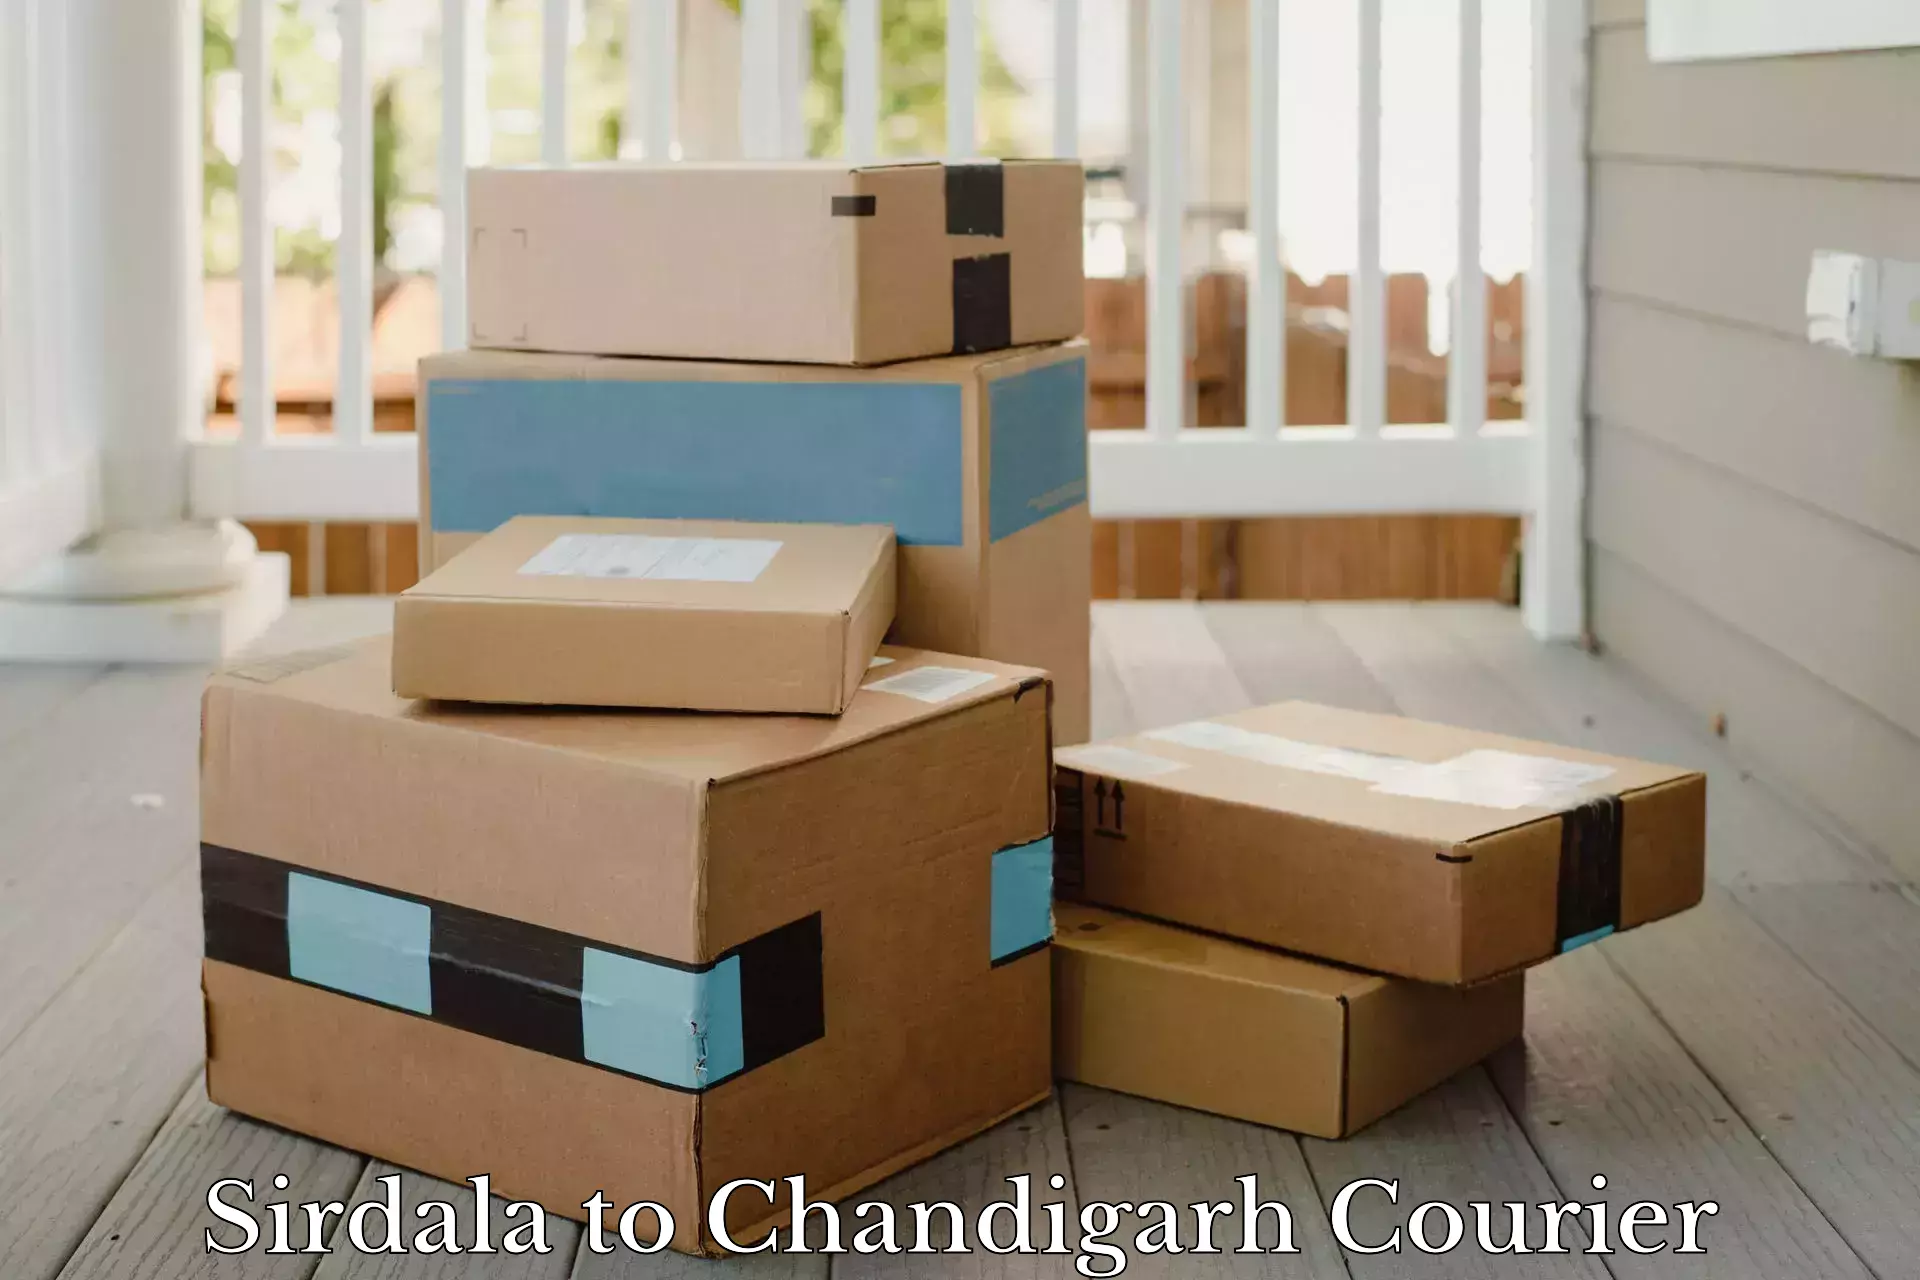 Subscription-based courier Sirdala to Chandigarh